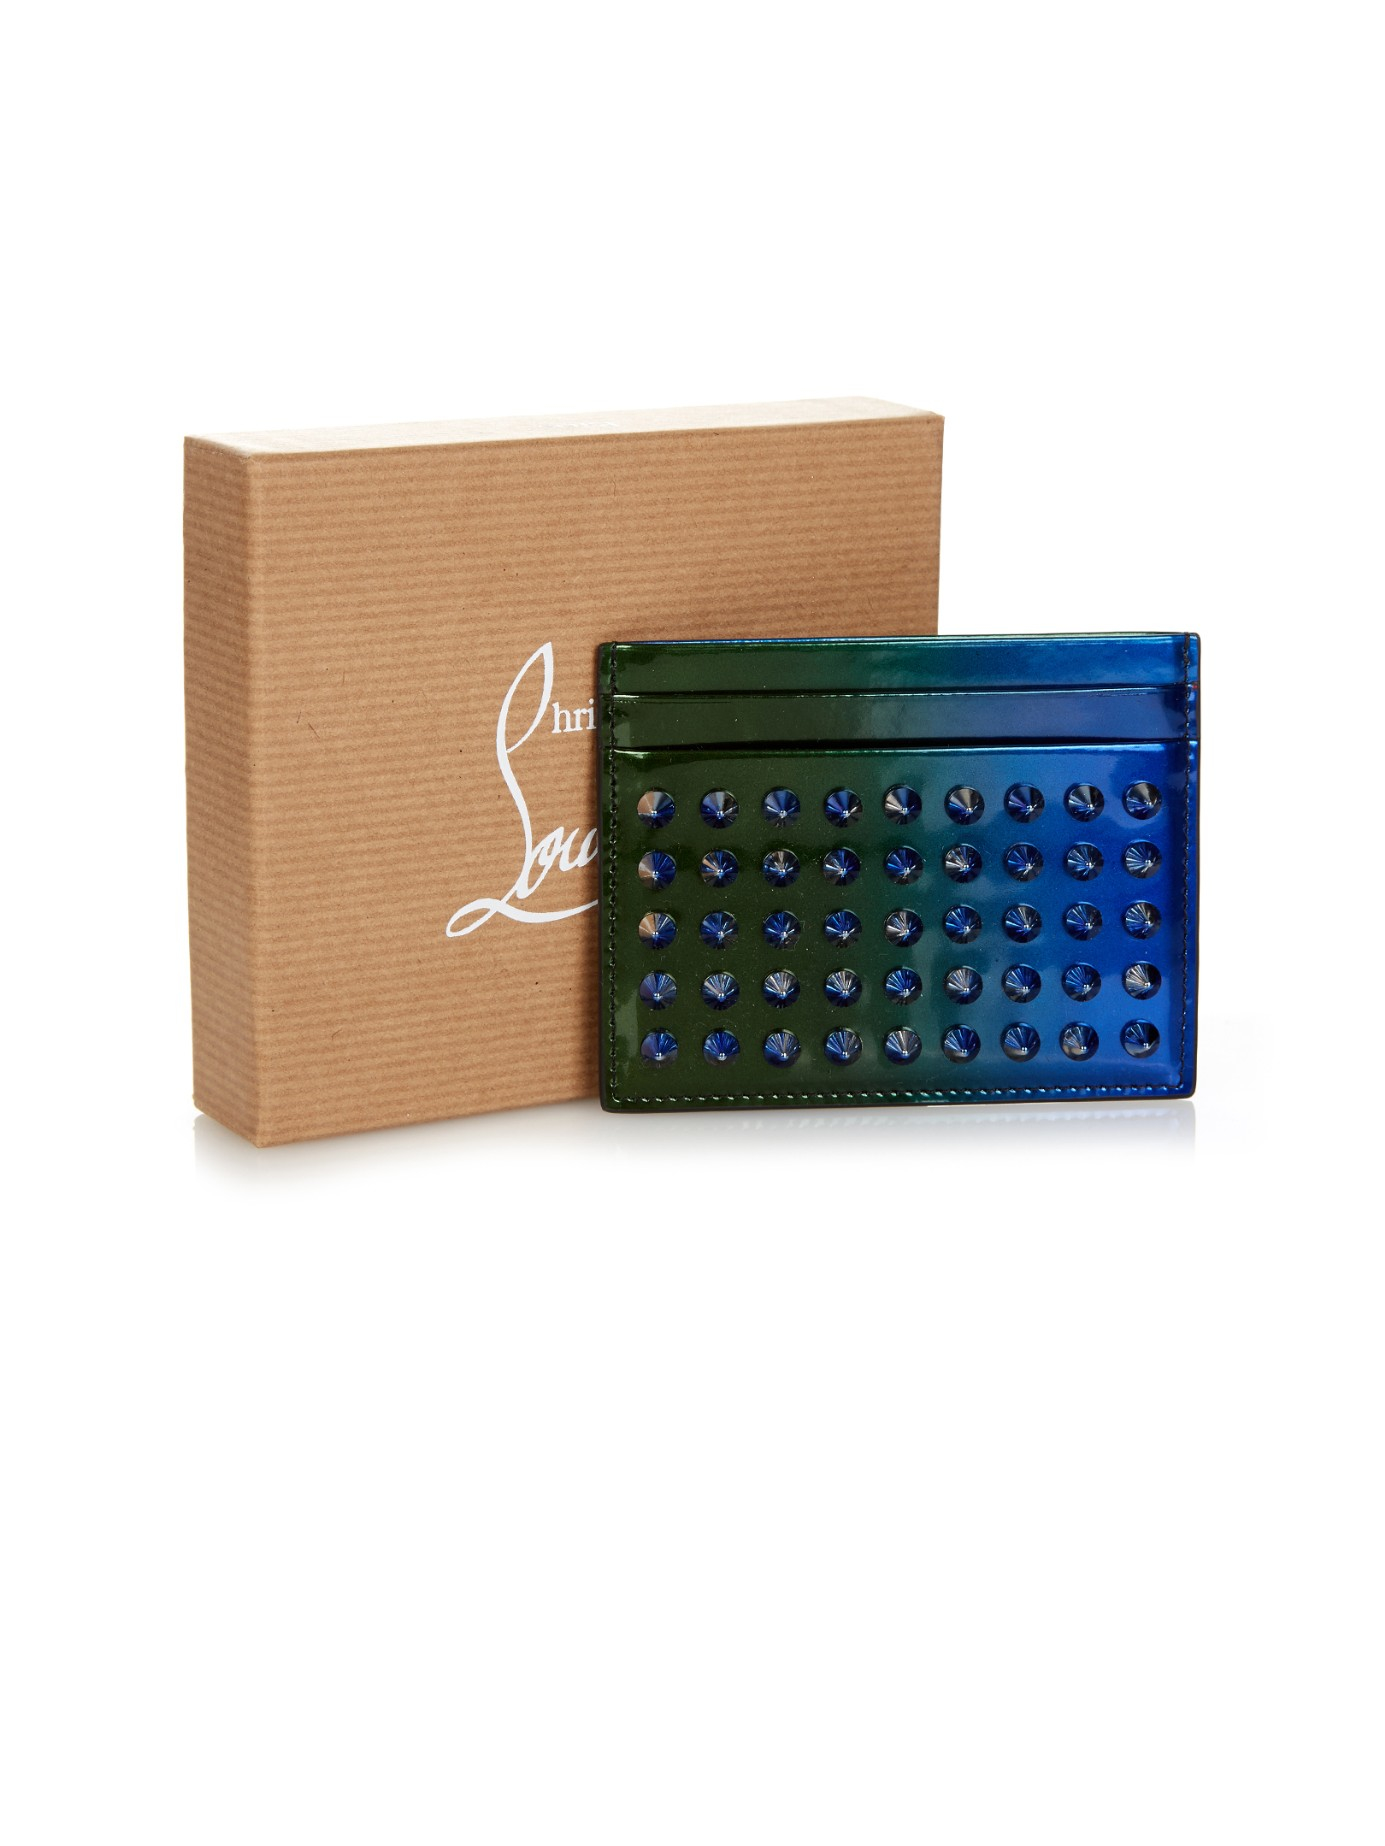 Christian Louboutin Kios Spikes Patent-Leather Cardholder in Blue 